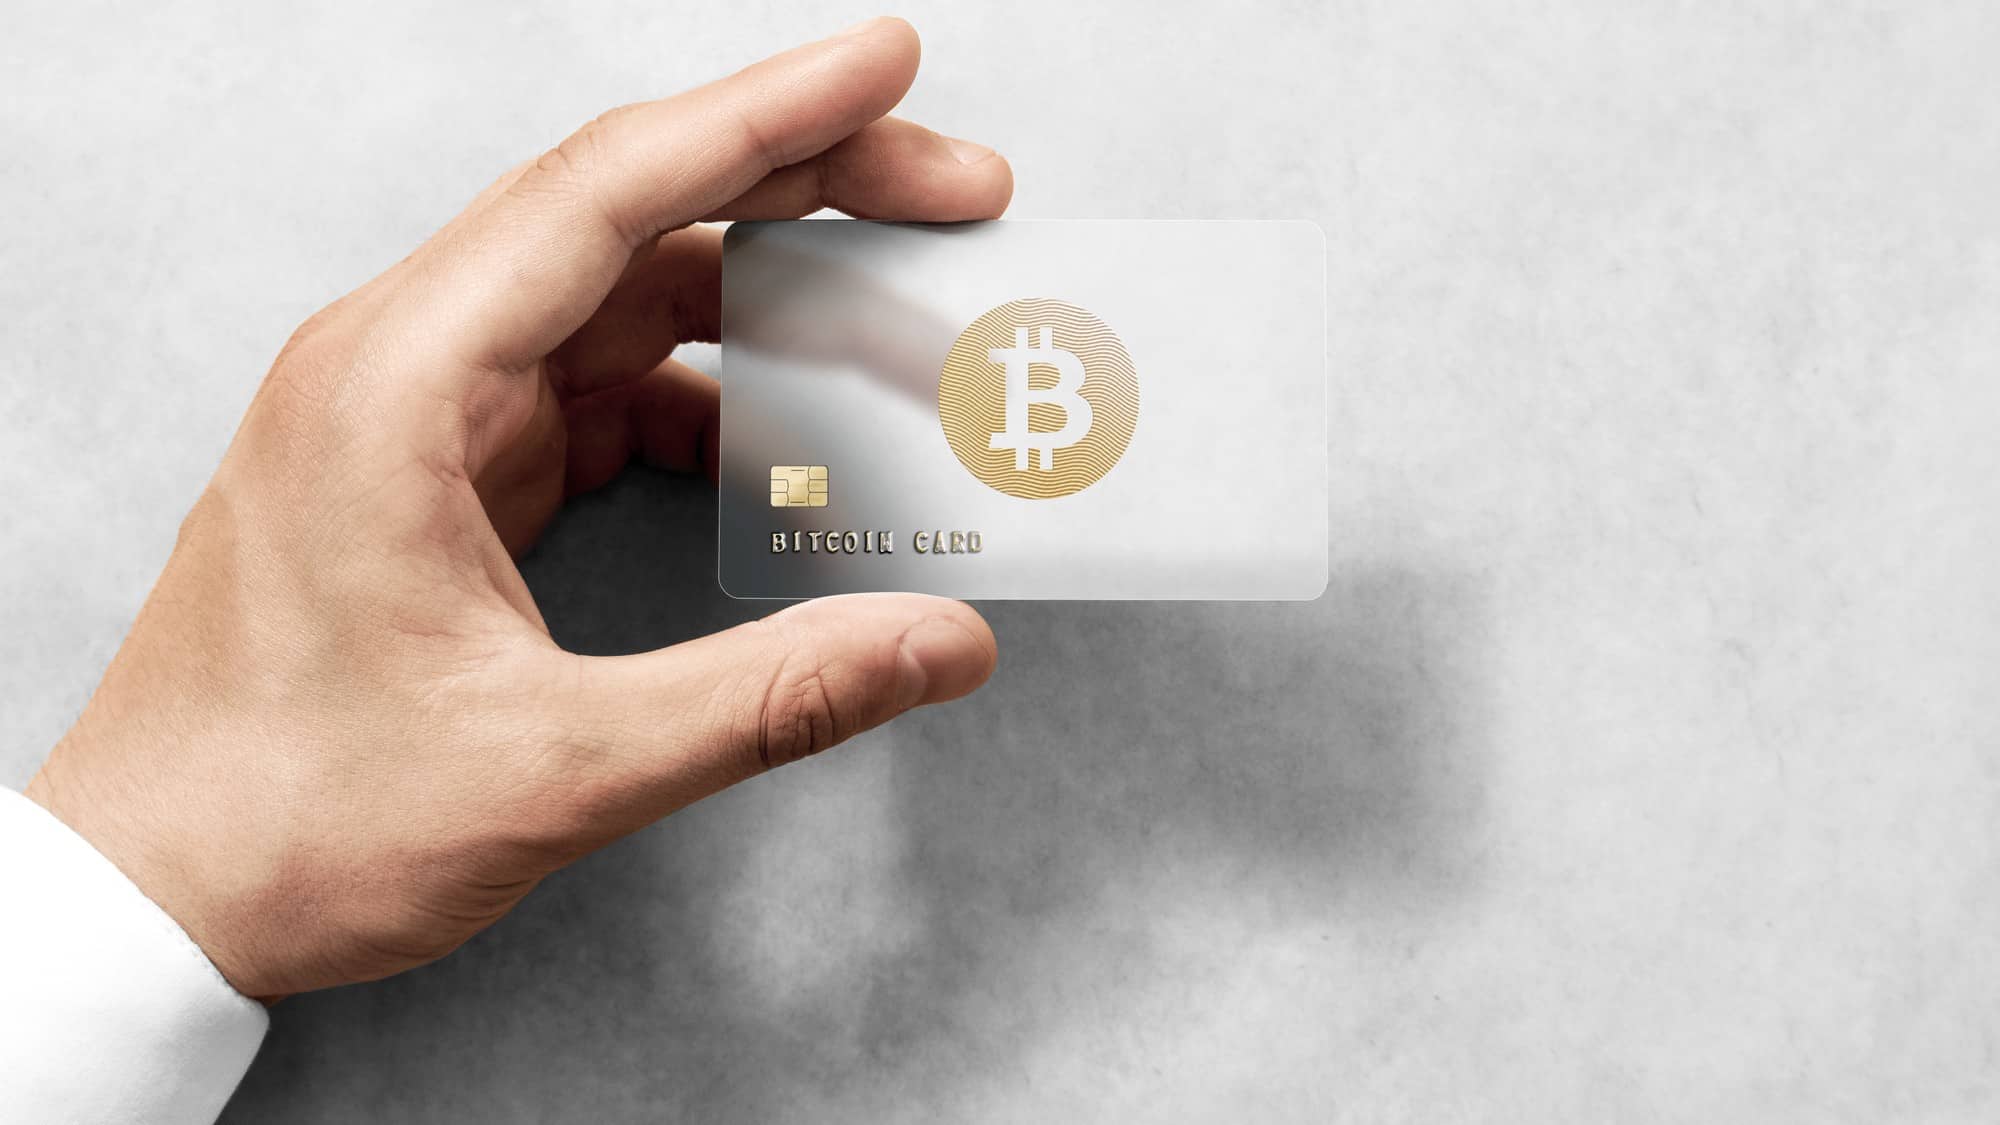 man's hand holding a credit card that says bitcoin card